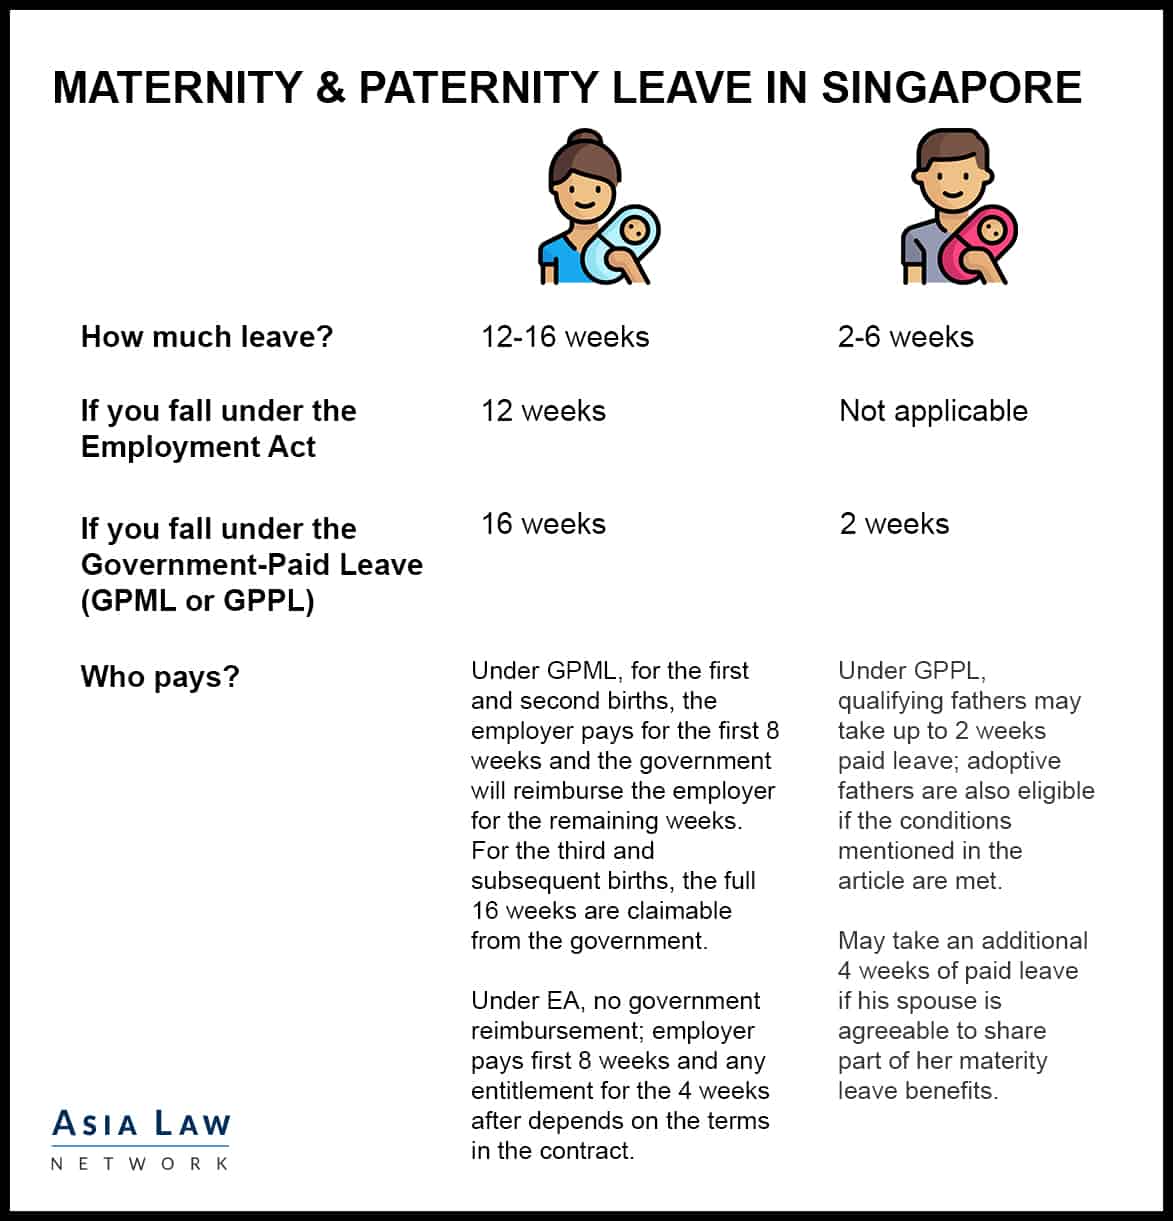 Maternity and Paternity Leave Pay (Source: Asia Law Network)